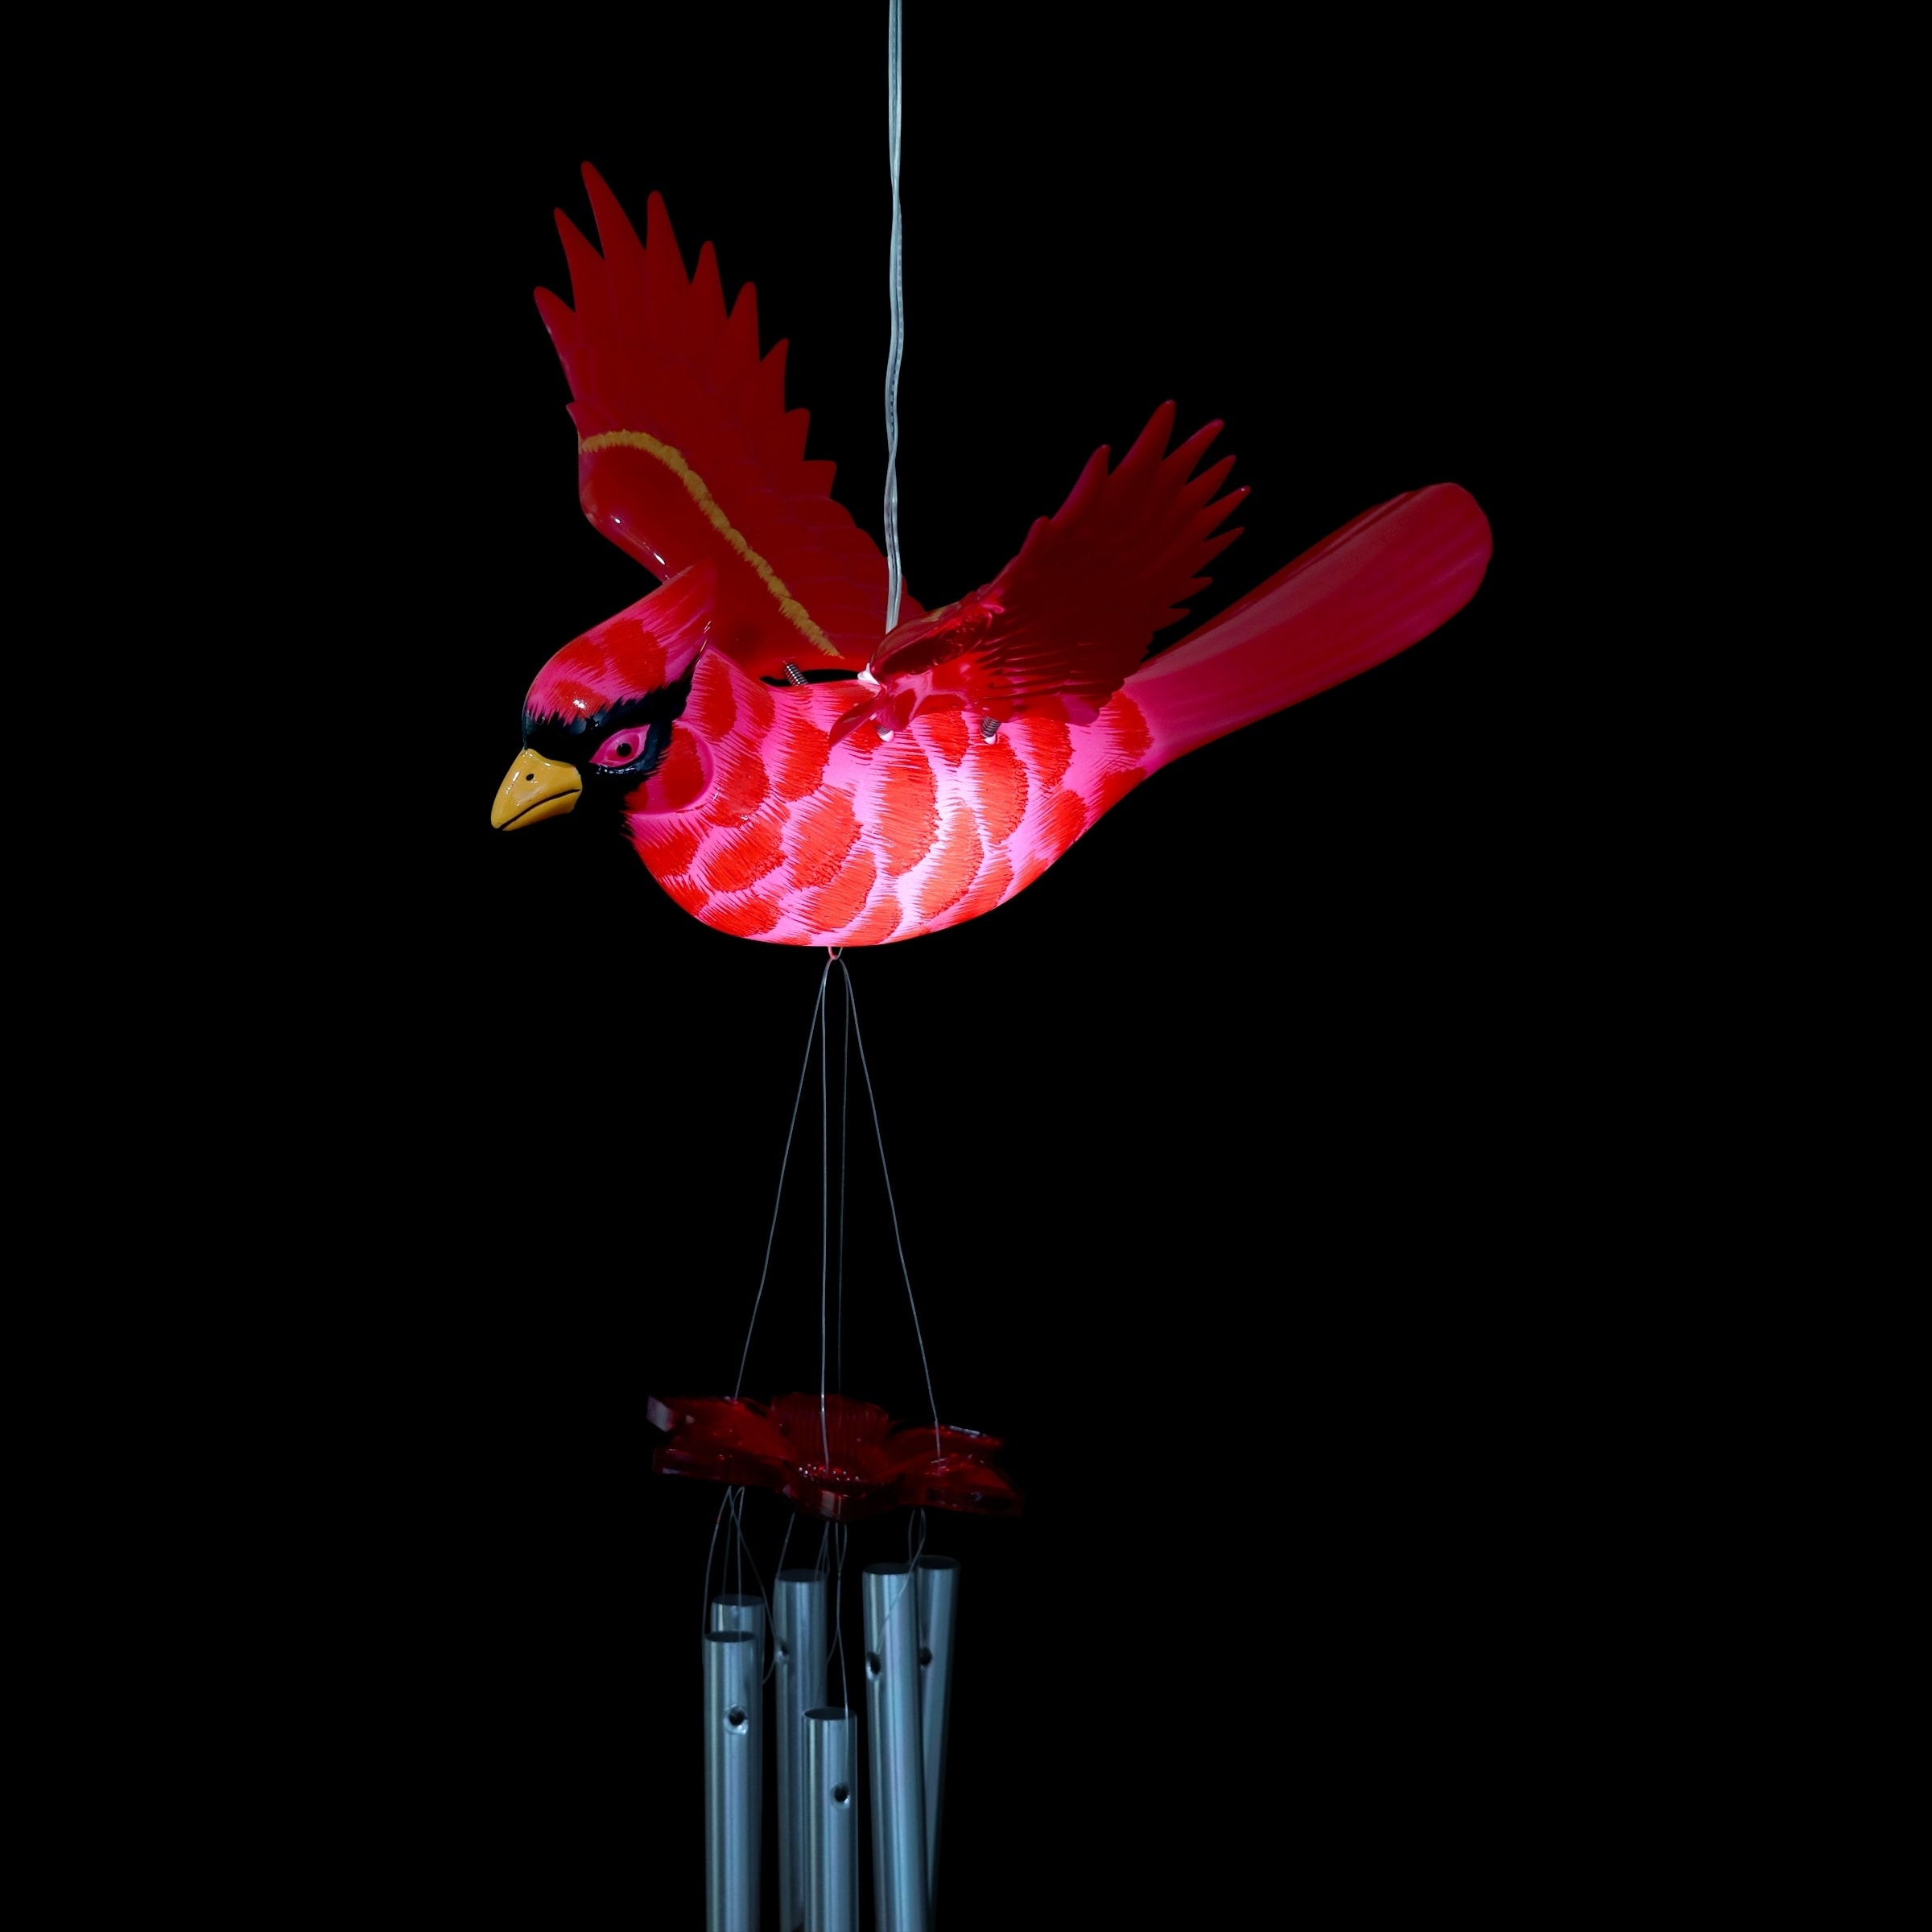 Solar Powered Fluttering Red Cardinal Bird with Hanger Flaps Wings 